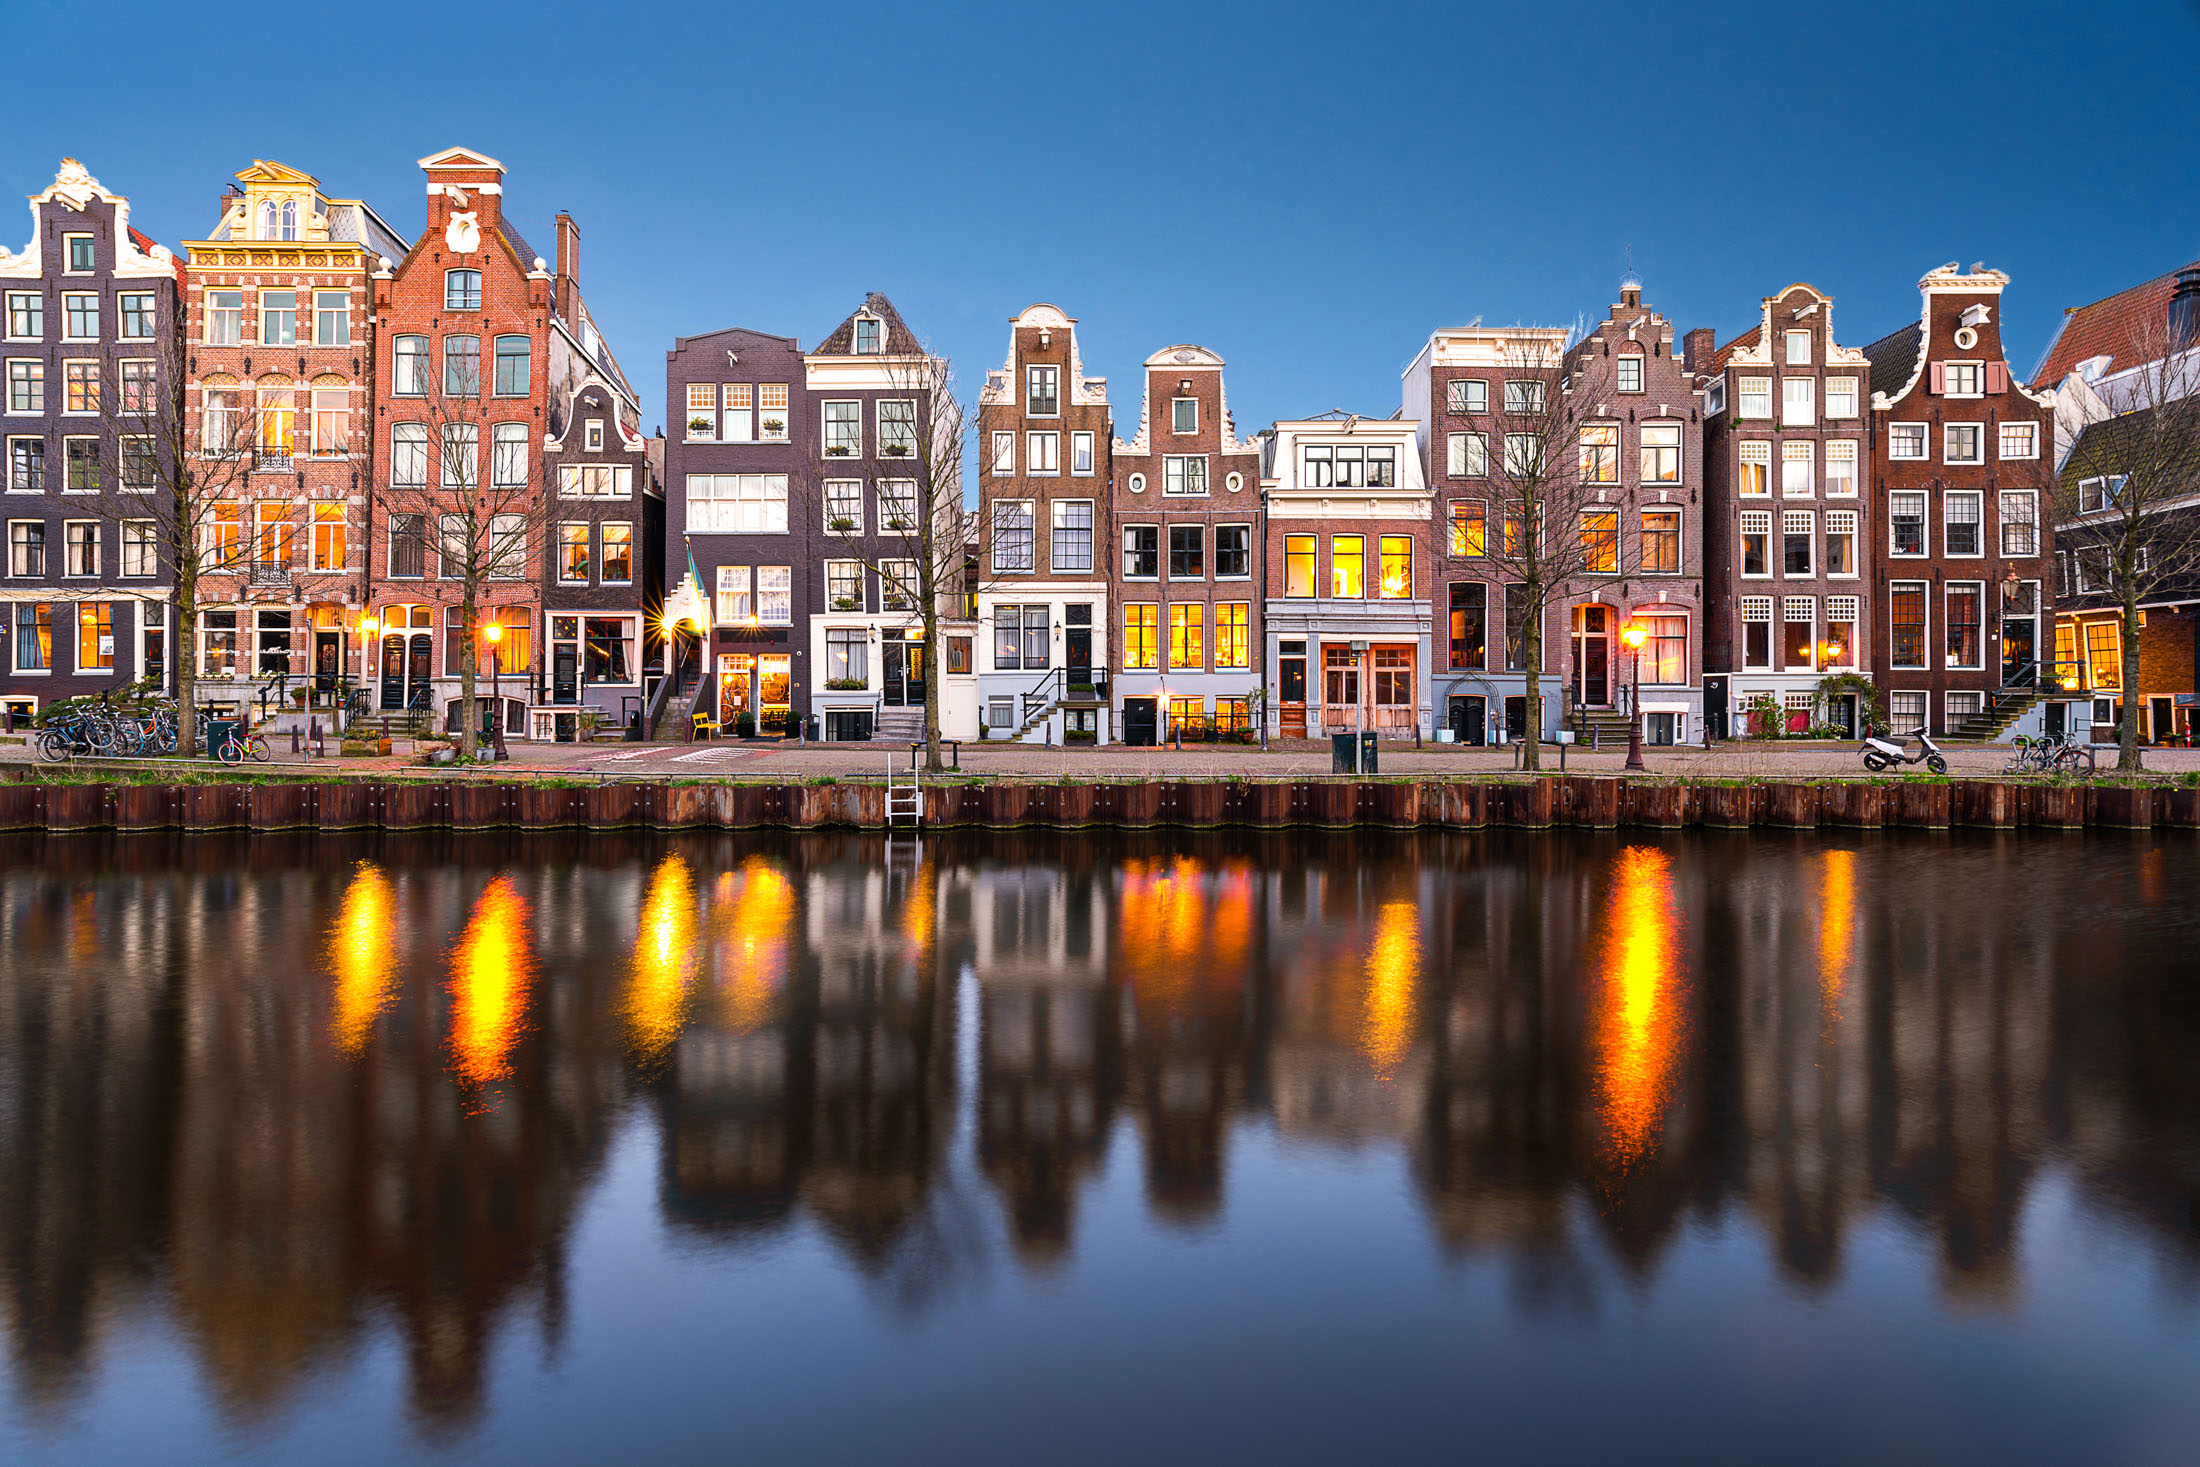 This is a beautiful photo of the canal houses on the Herengracht canal in the center of Amsterdam. The unique architecture of the houses dates all the way back to the 16th century and now the whole city center is a UNESCO world heritage sites.